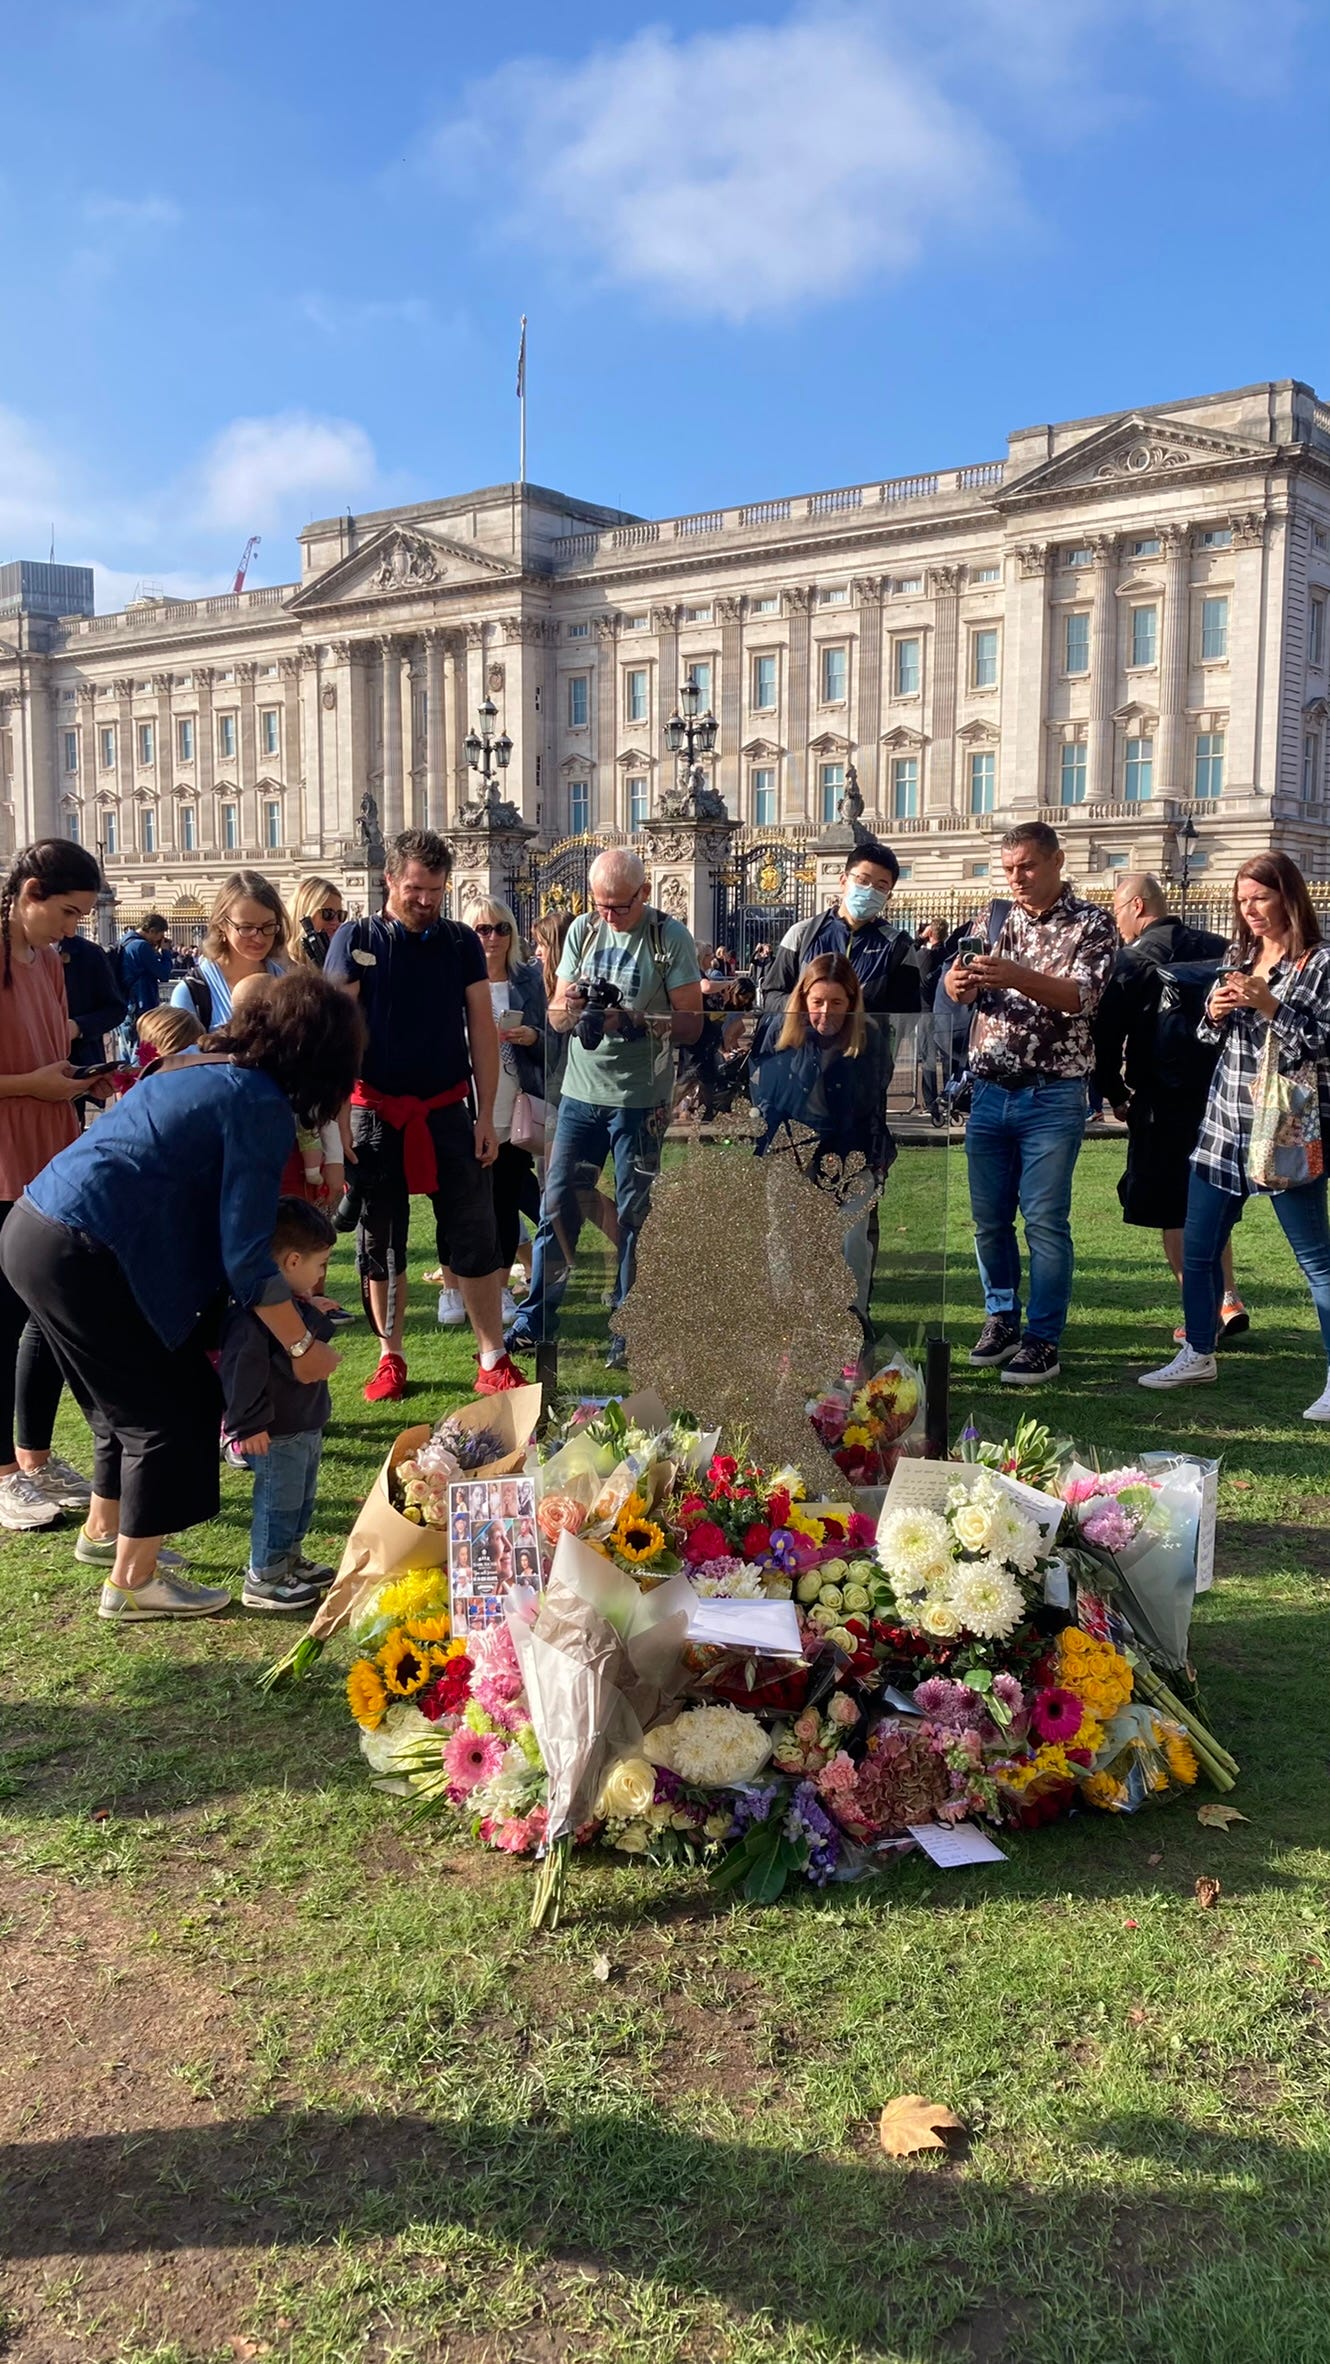 People offer floral tribute to the Queen outside Buckingham Palace, London on September 10, 2022 (Image: Nachiket Deuskar/Untwined).